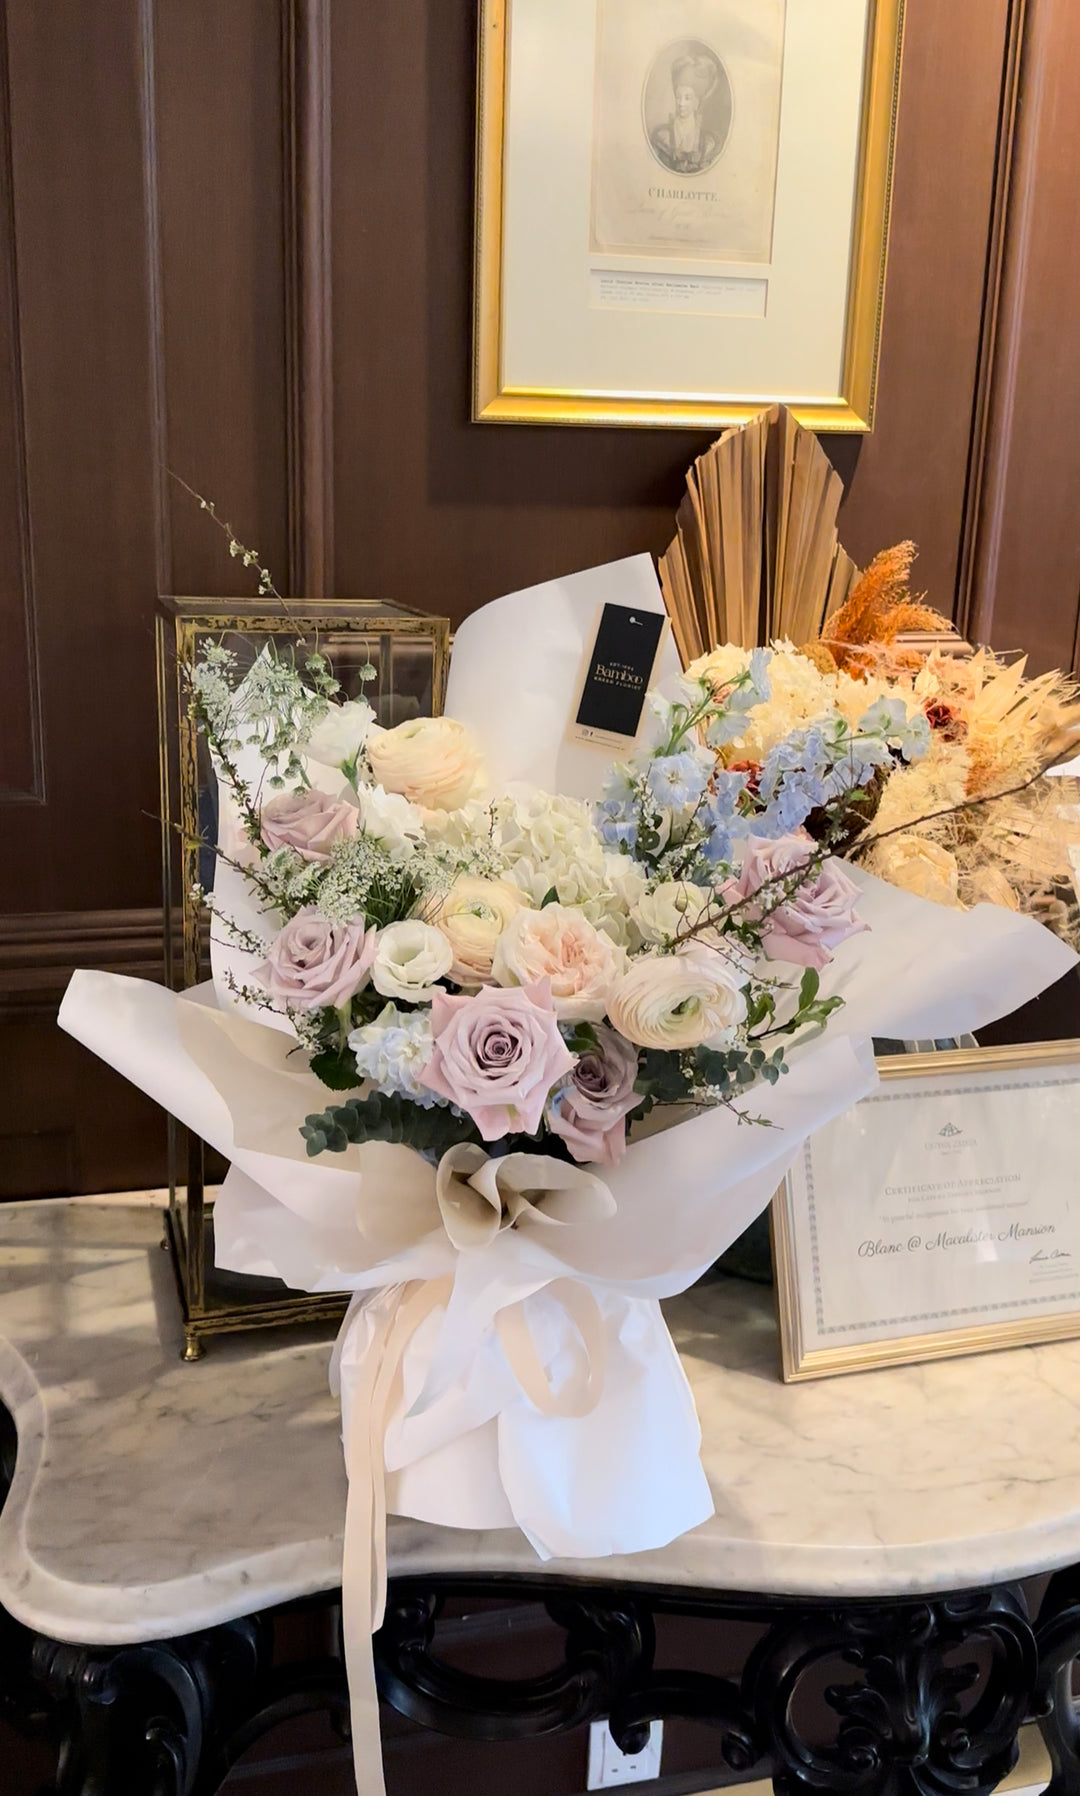 Omakase (お任せ) is a Japanese phrase that means “I'll leave it up to you”.   Leave it to us to create an original design bouquet that is inspired by botanical things, floral therapy.    